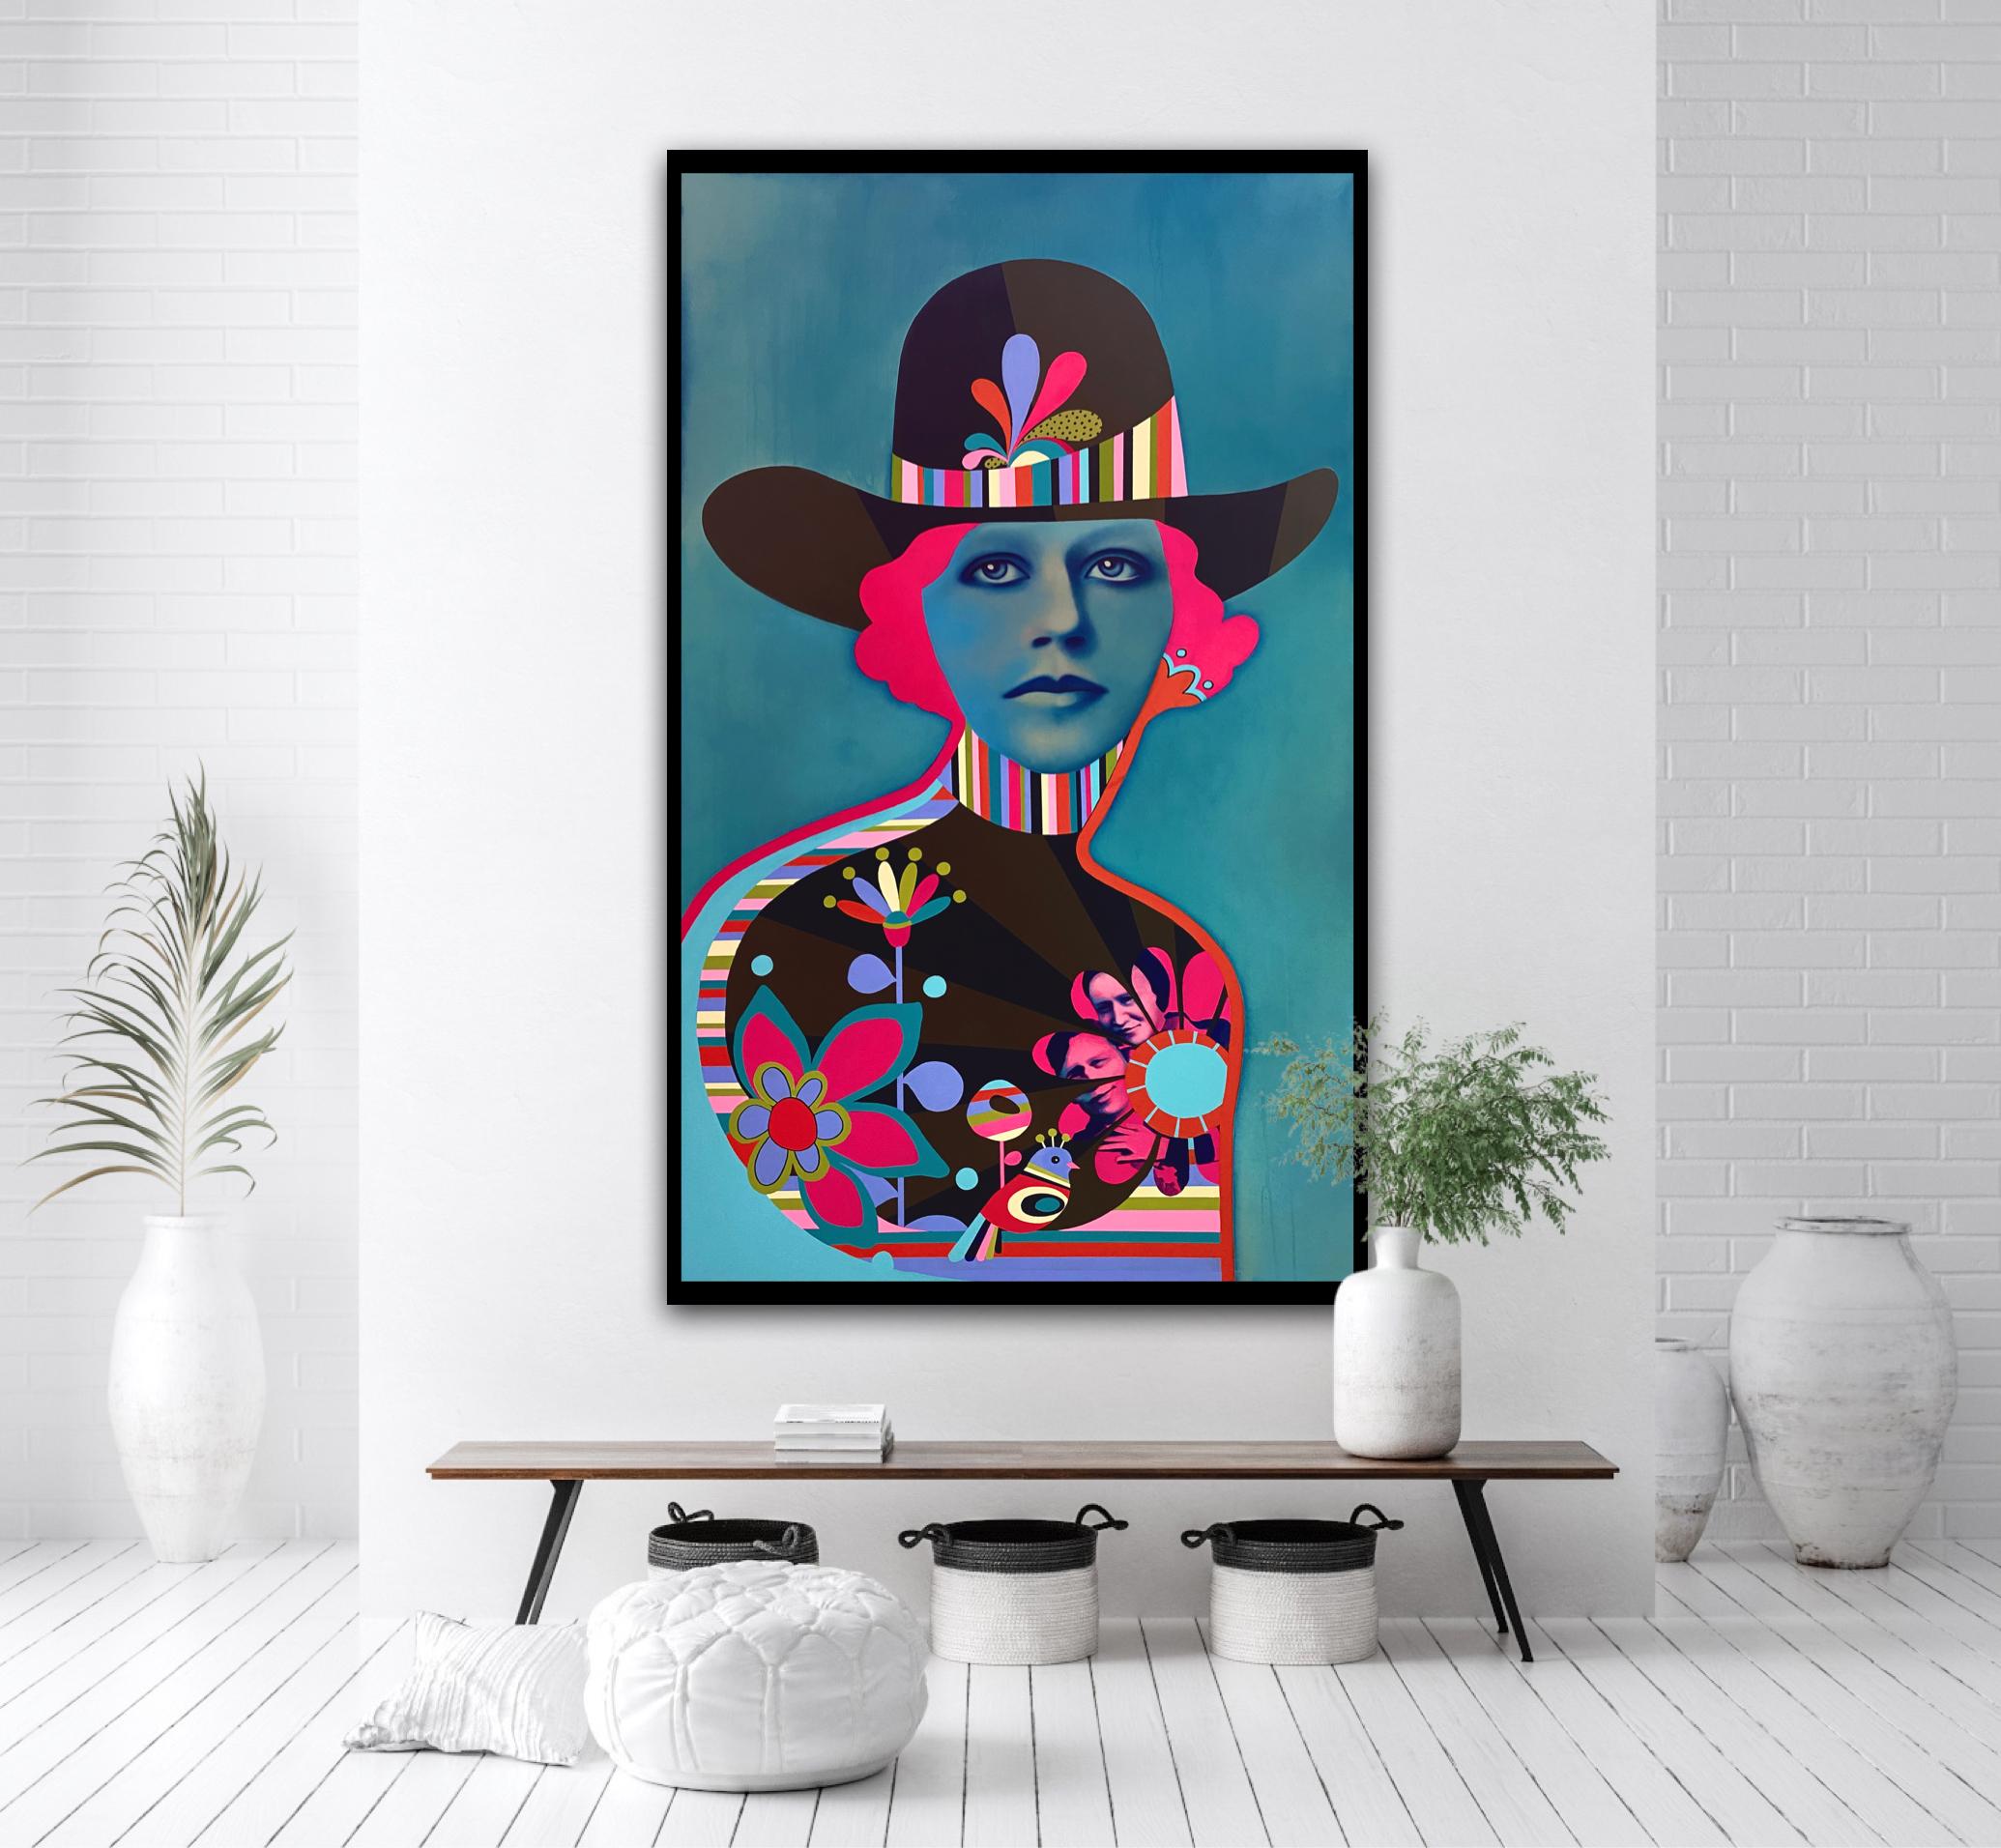 Outlaw, abstract pop art figurative painting, woman in cowboy hat, bright colors - Painting by Ramona Nordal